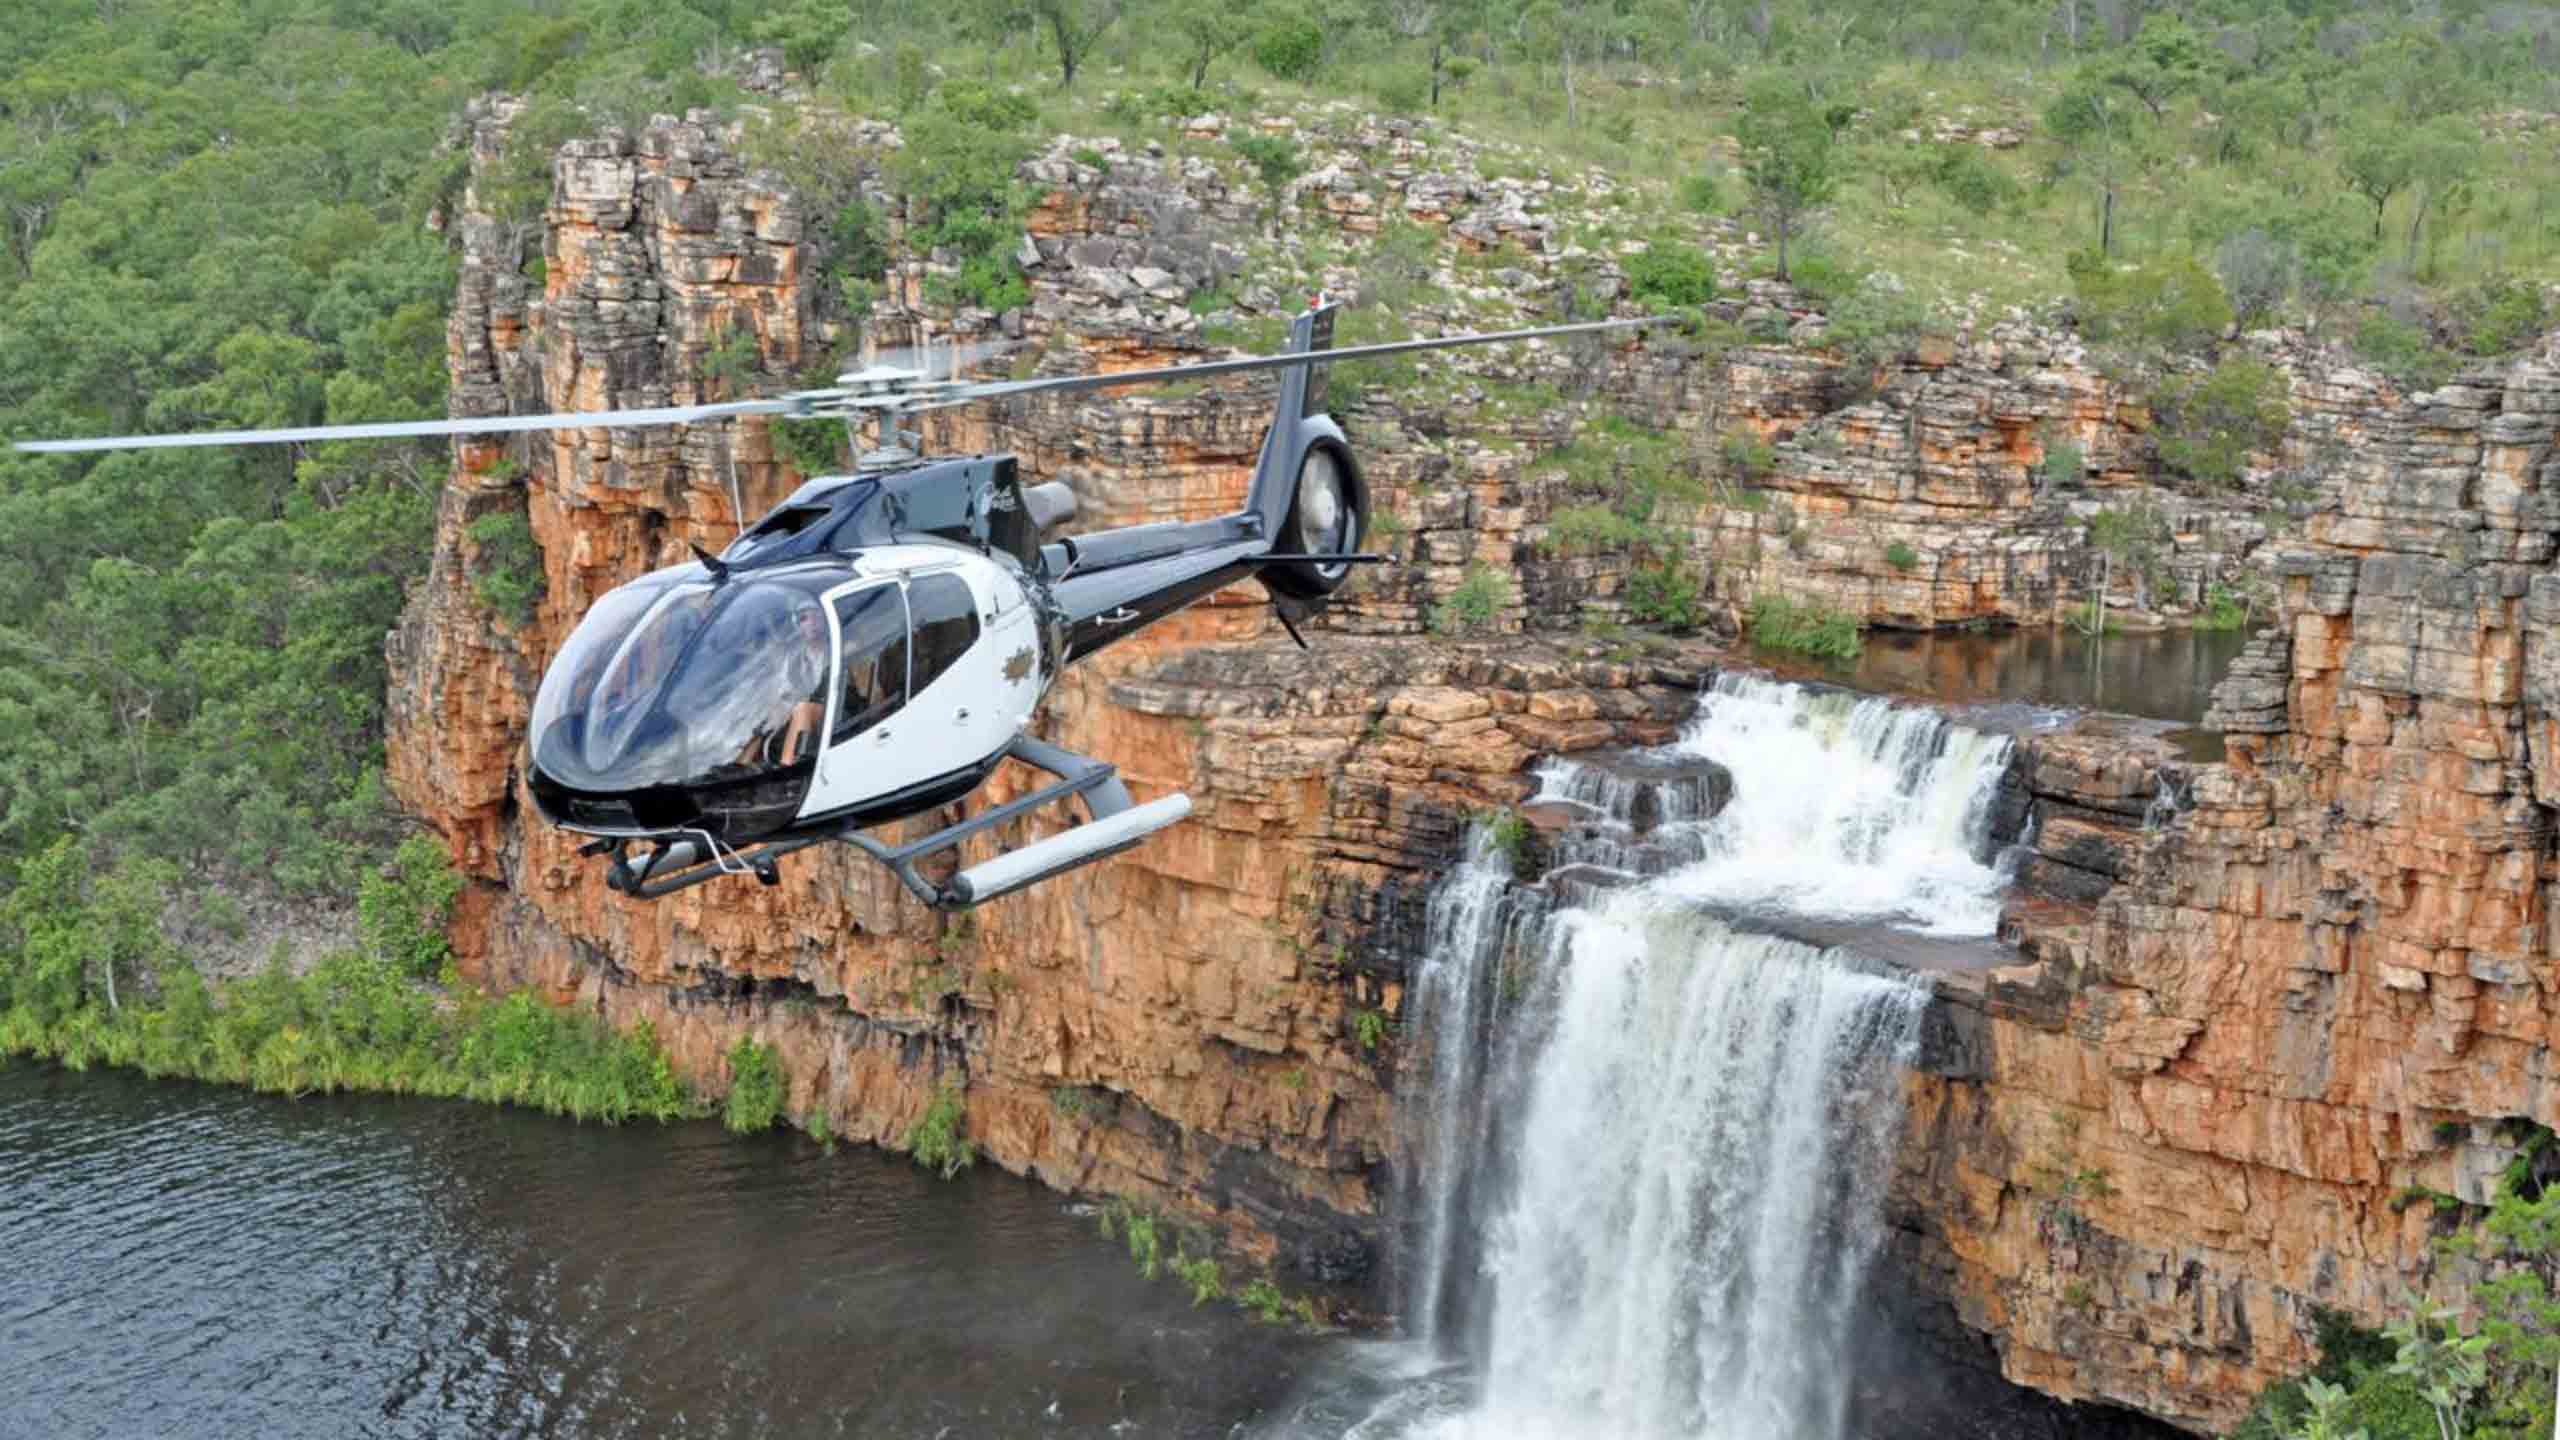 true-north-cruise-australia-papua-helicopter-flying-near-waterfall